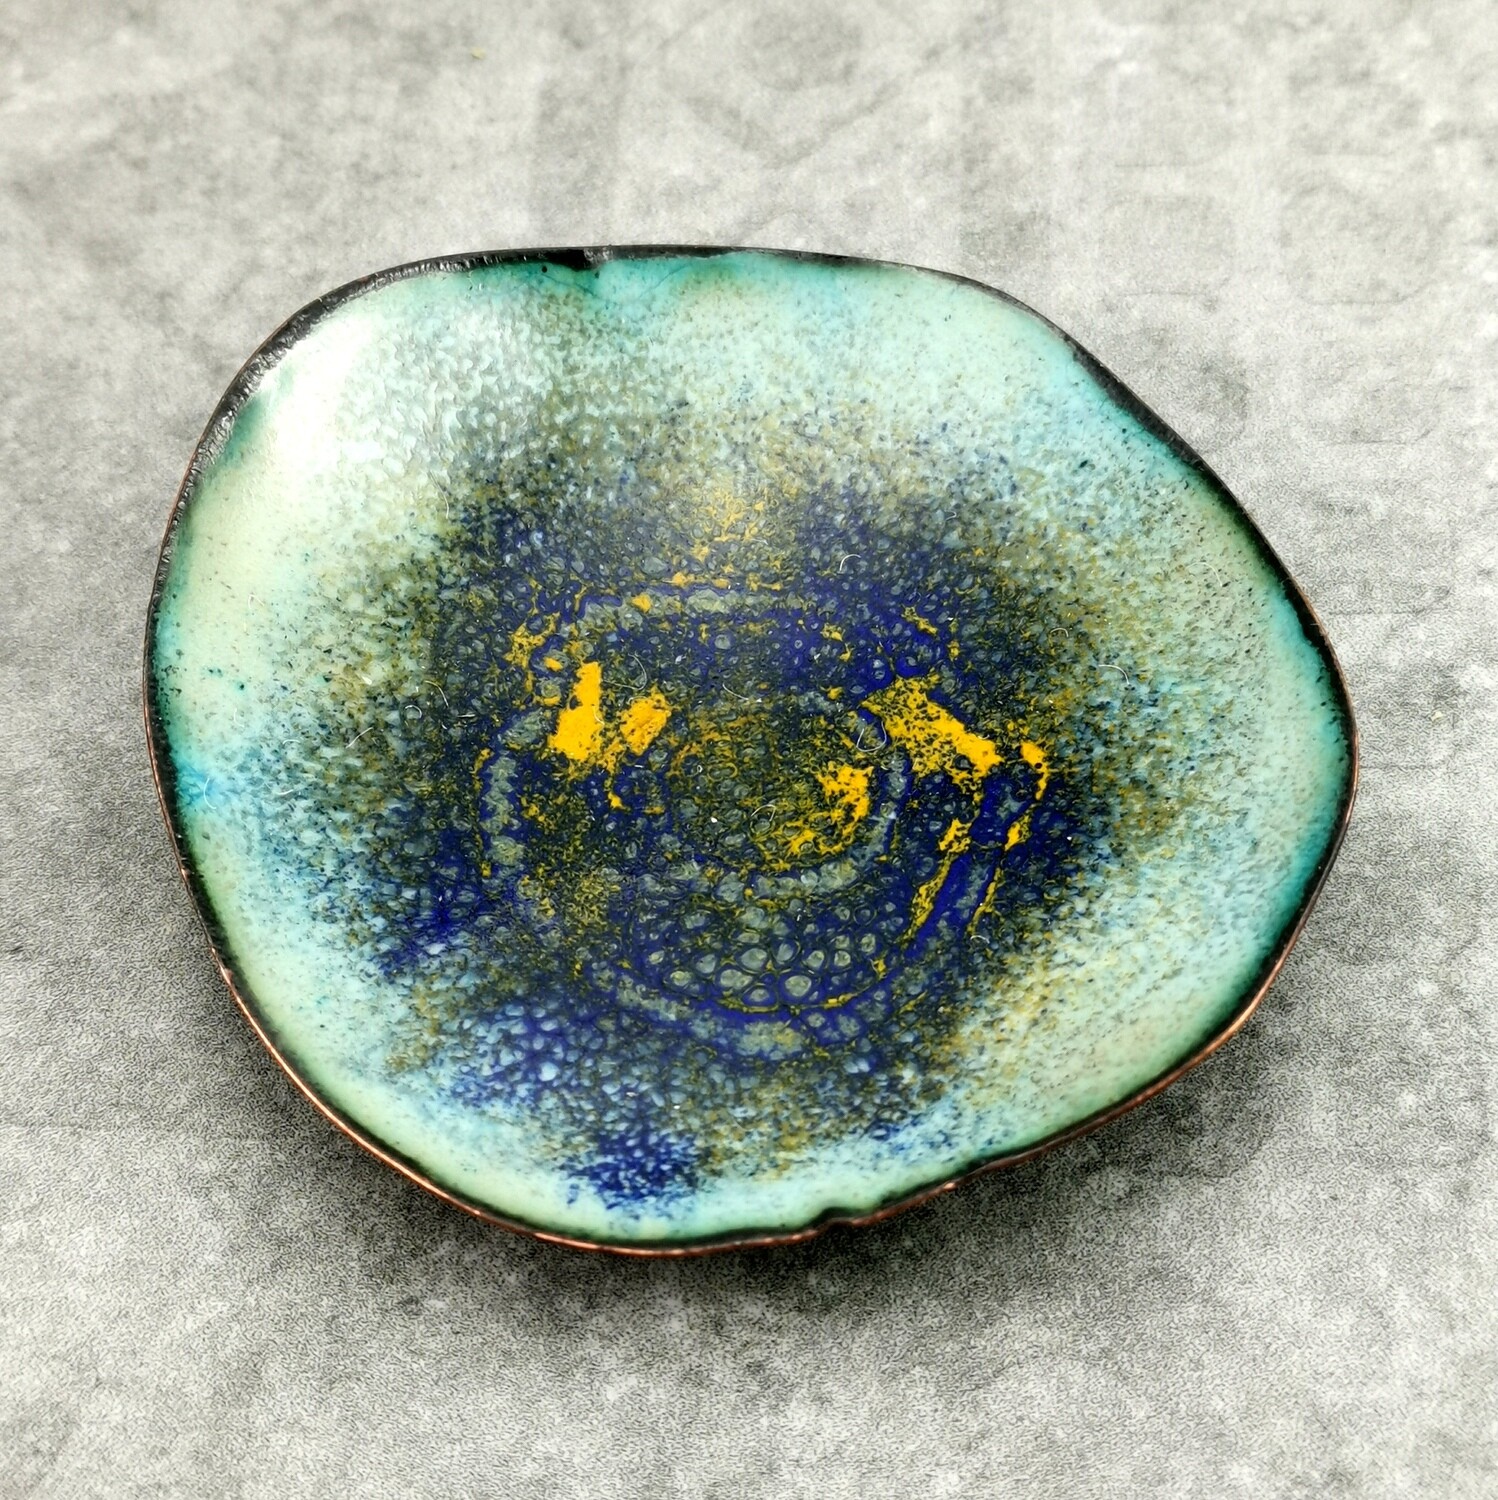 Small Hand Forged Copper Dish, Handmade Enamel Dish, Organic Shaped Dish, 7 Year Anniversary for Her, 7th Anniversary Gift